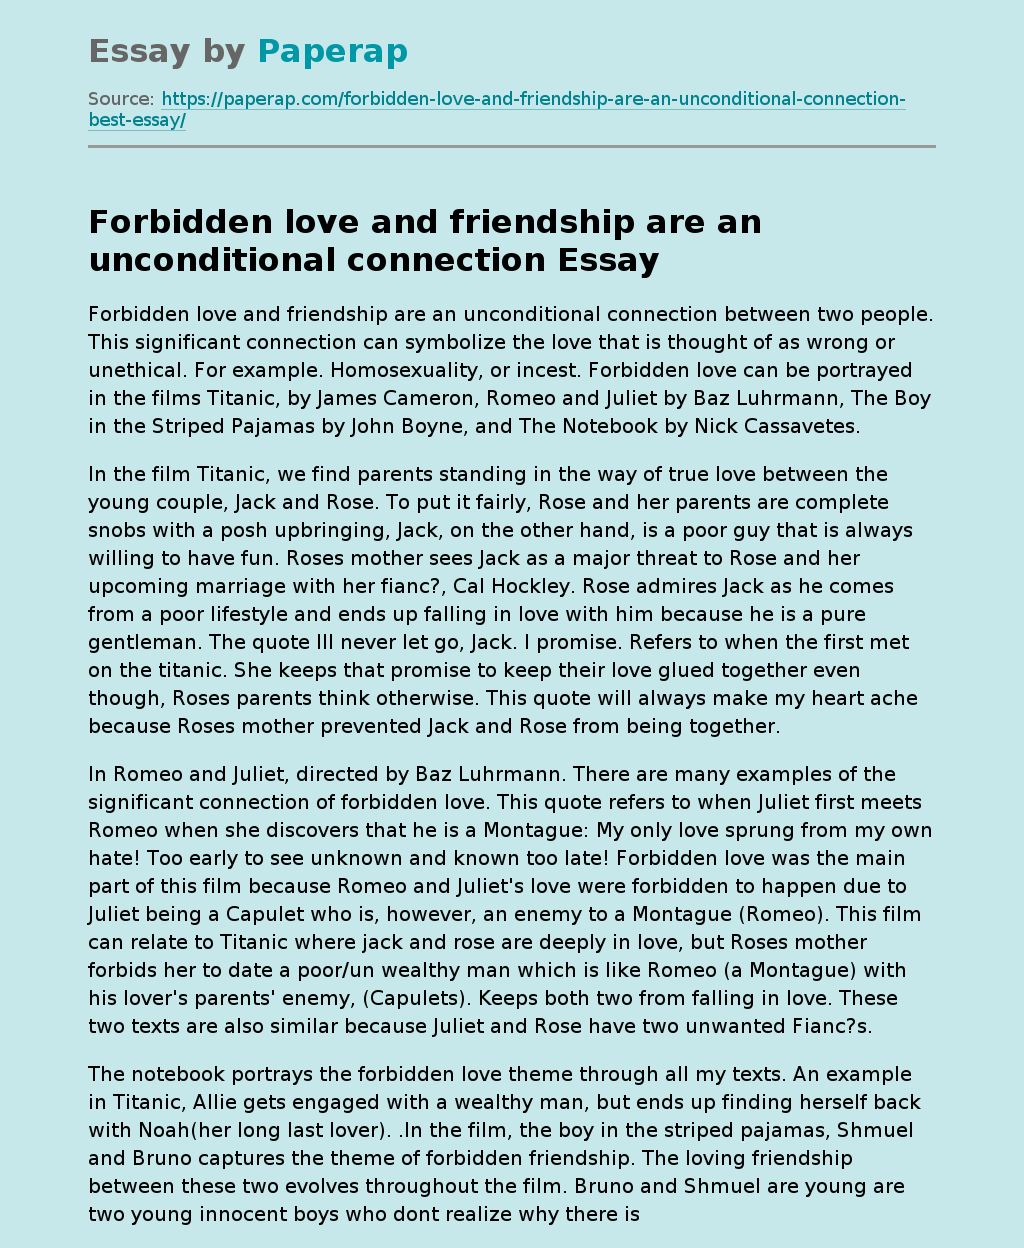 Forbidden love and friendship are an unconditional connection